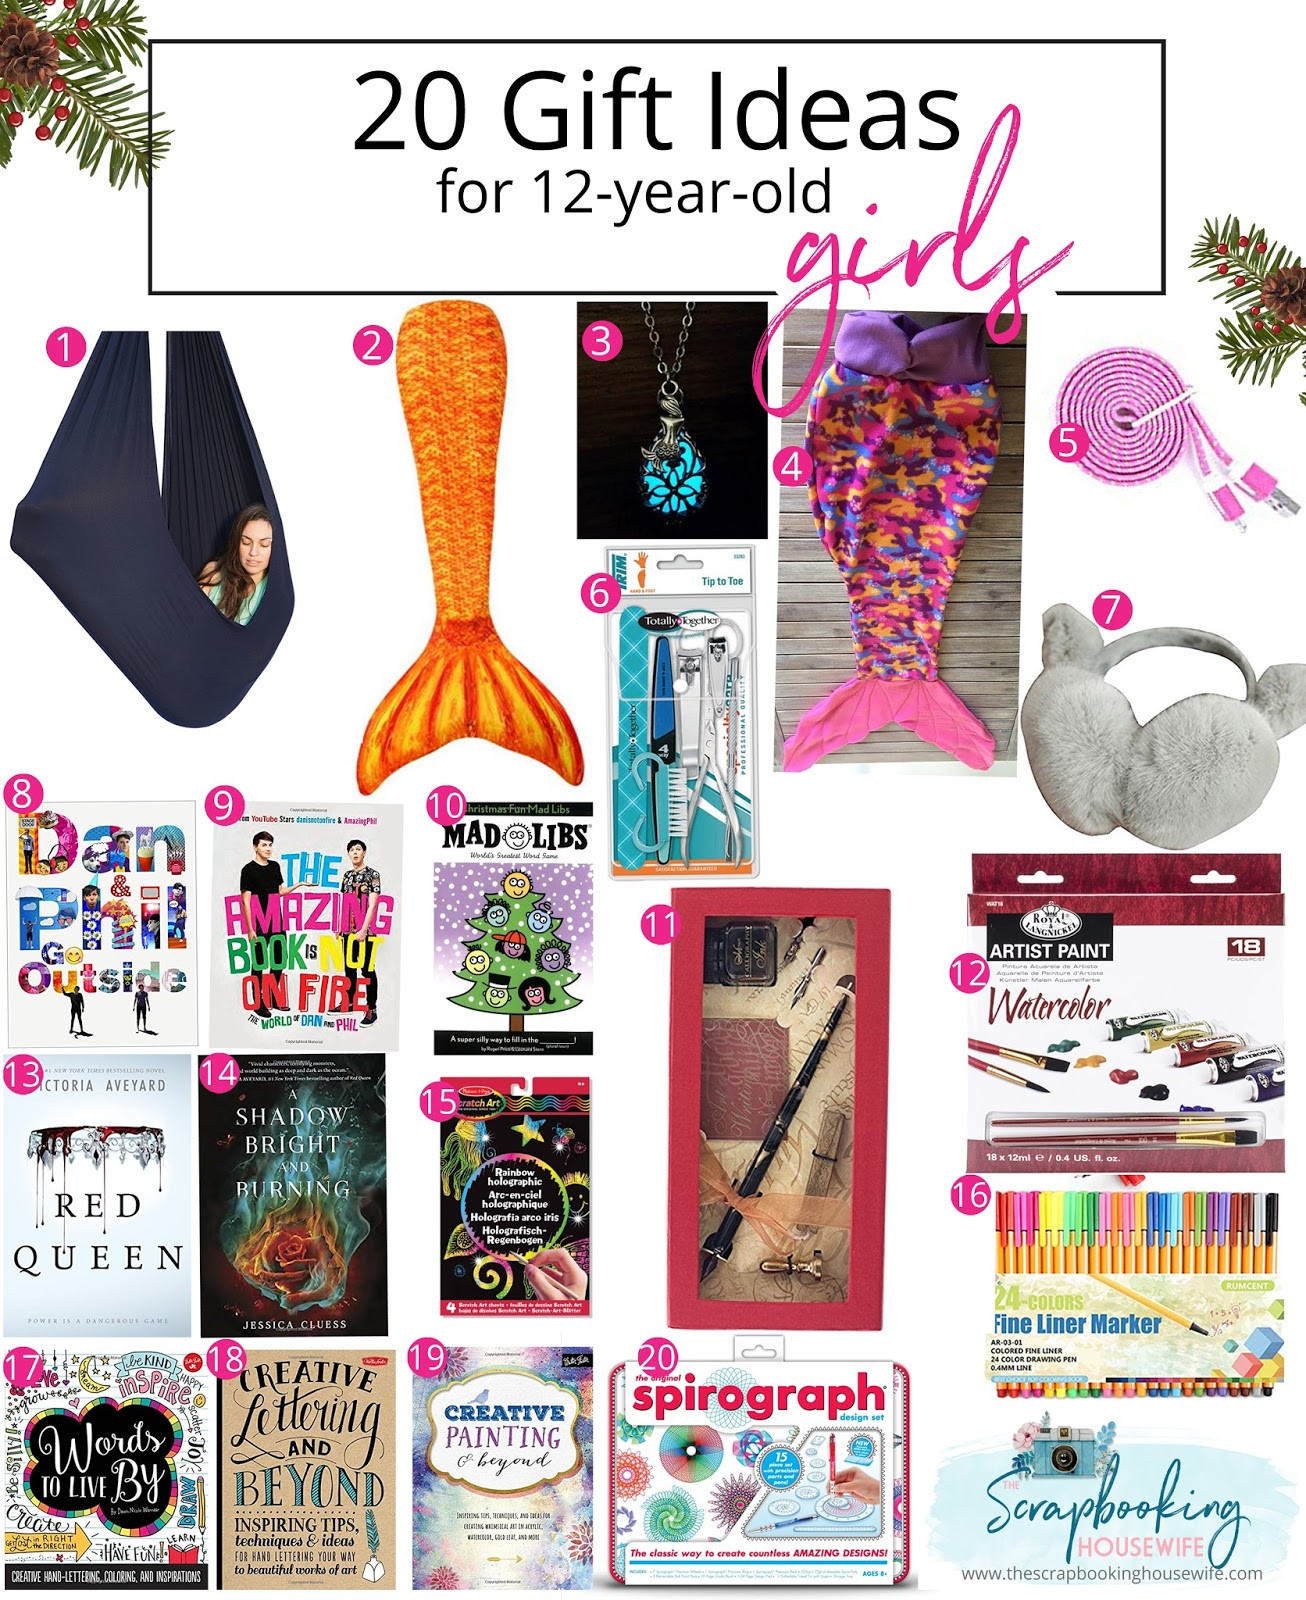 Gift Ideas for 12 Year Old Girls Unique Ellabella Designs 20 Gift Ideas for 12 Year Old Tween